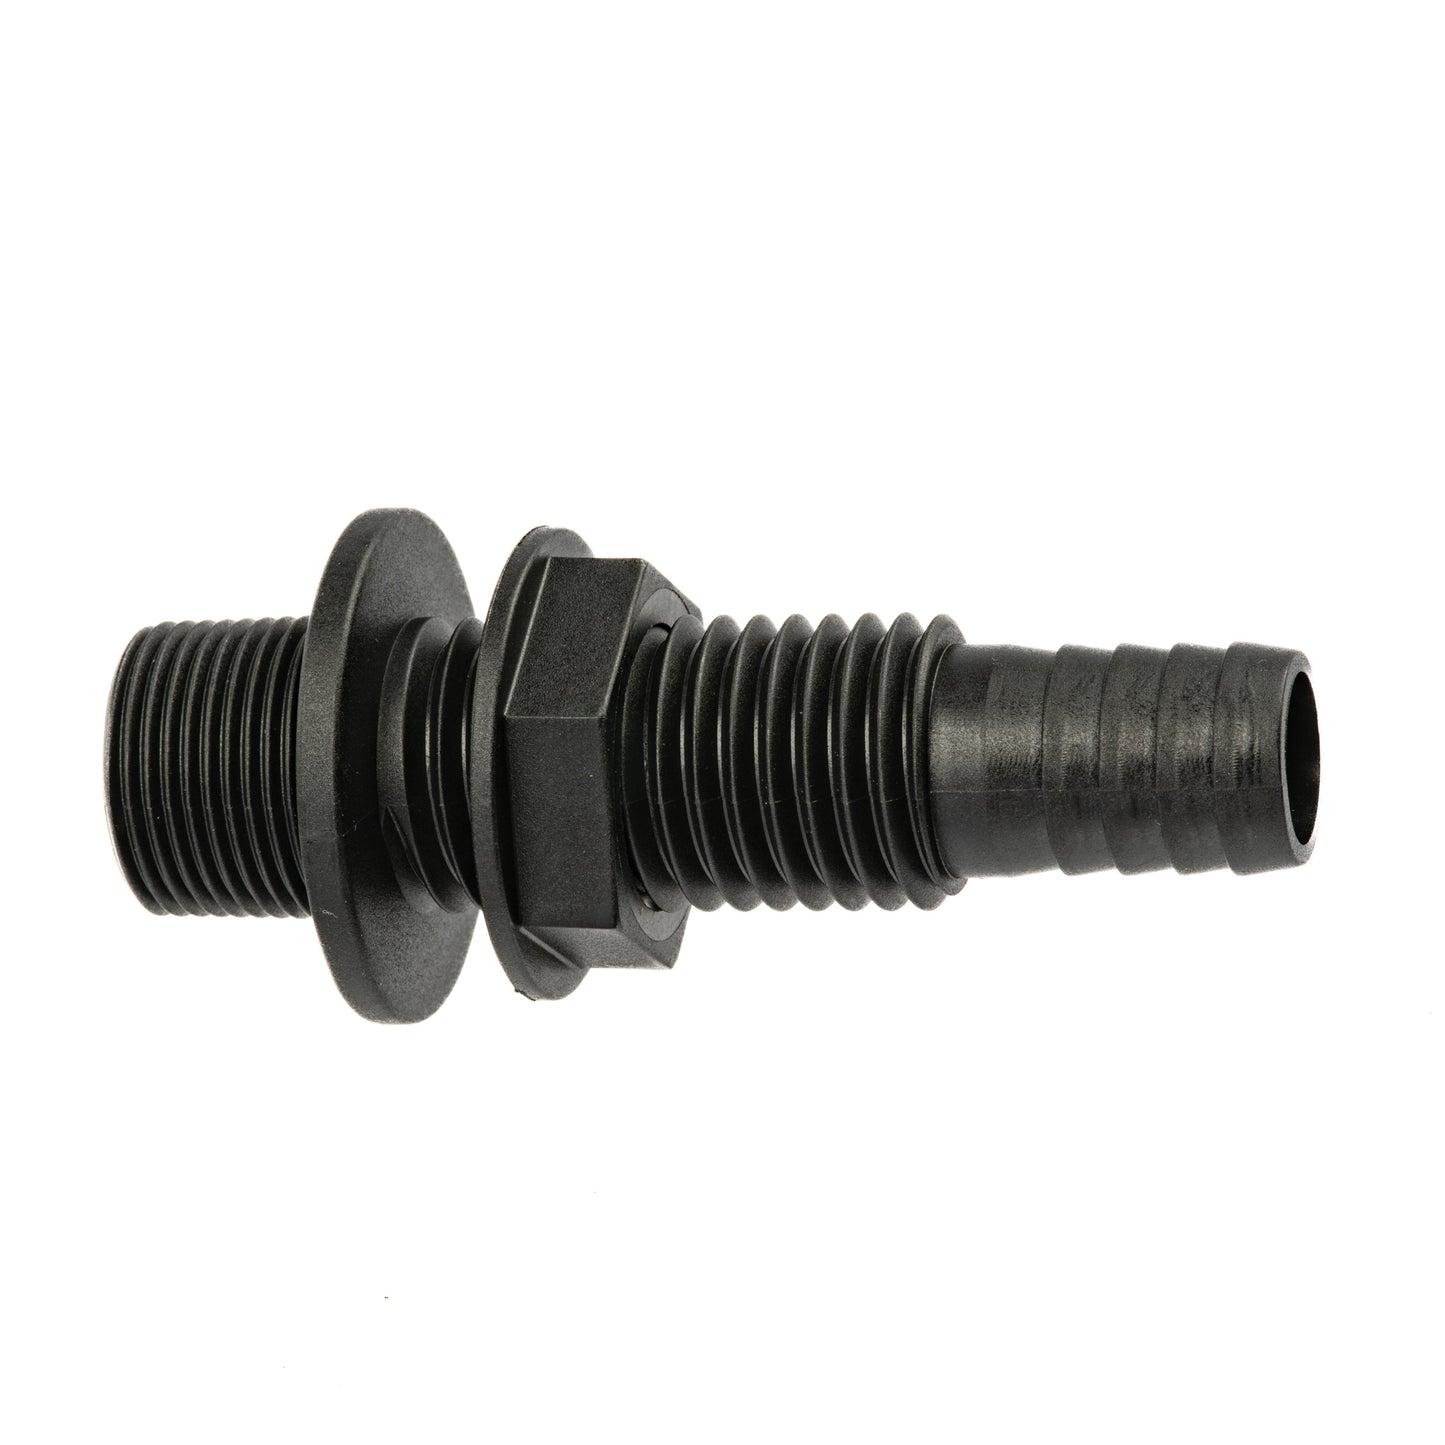 Livewell Fitting - Aerator Screen Adapter 3/4"HB